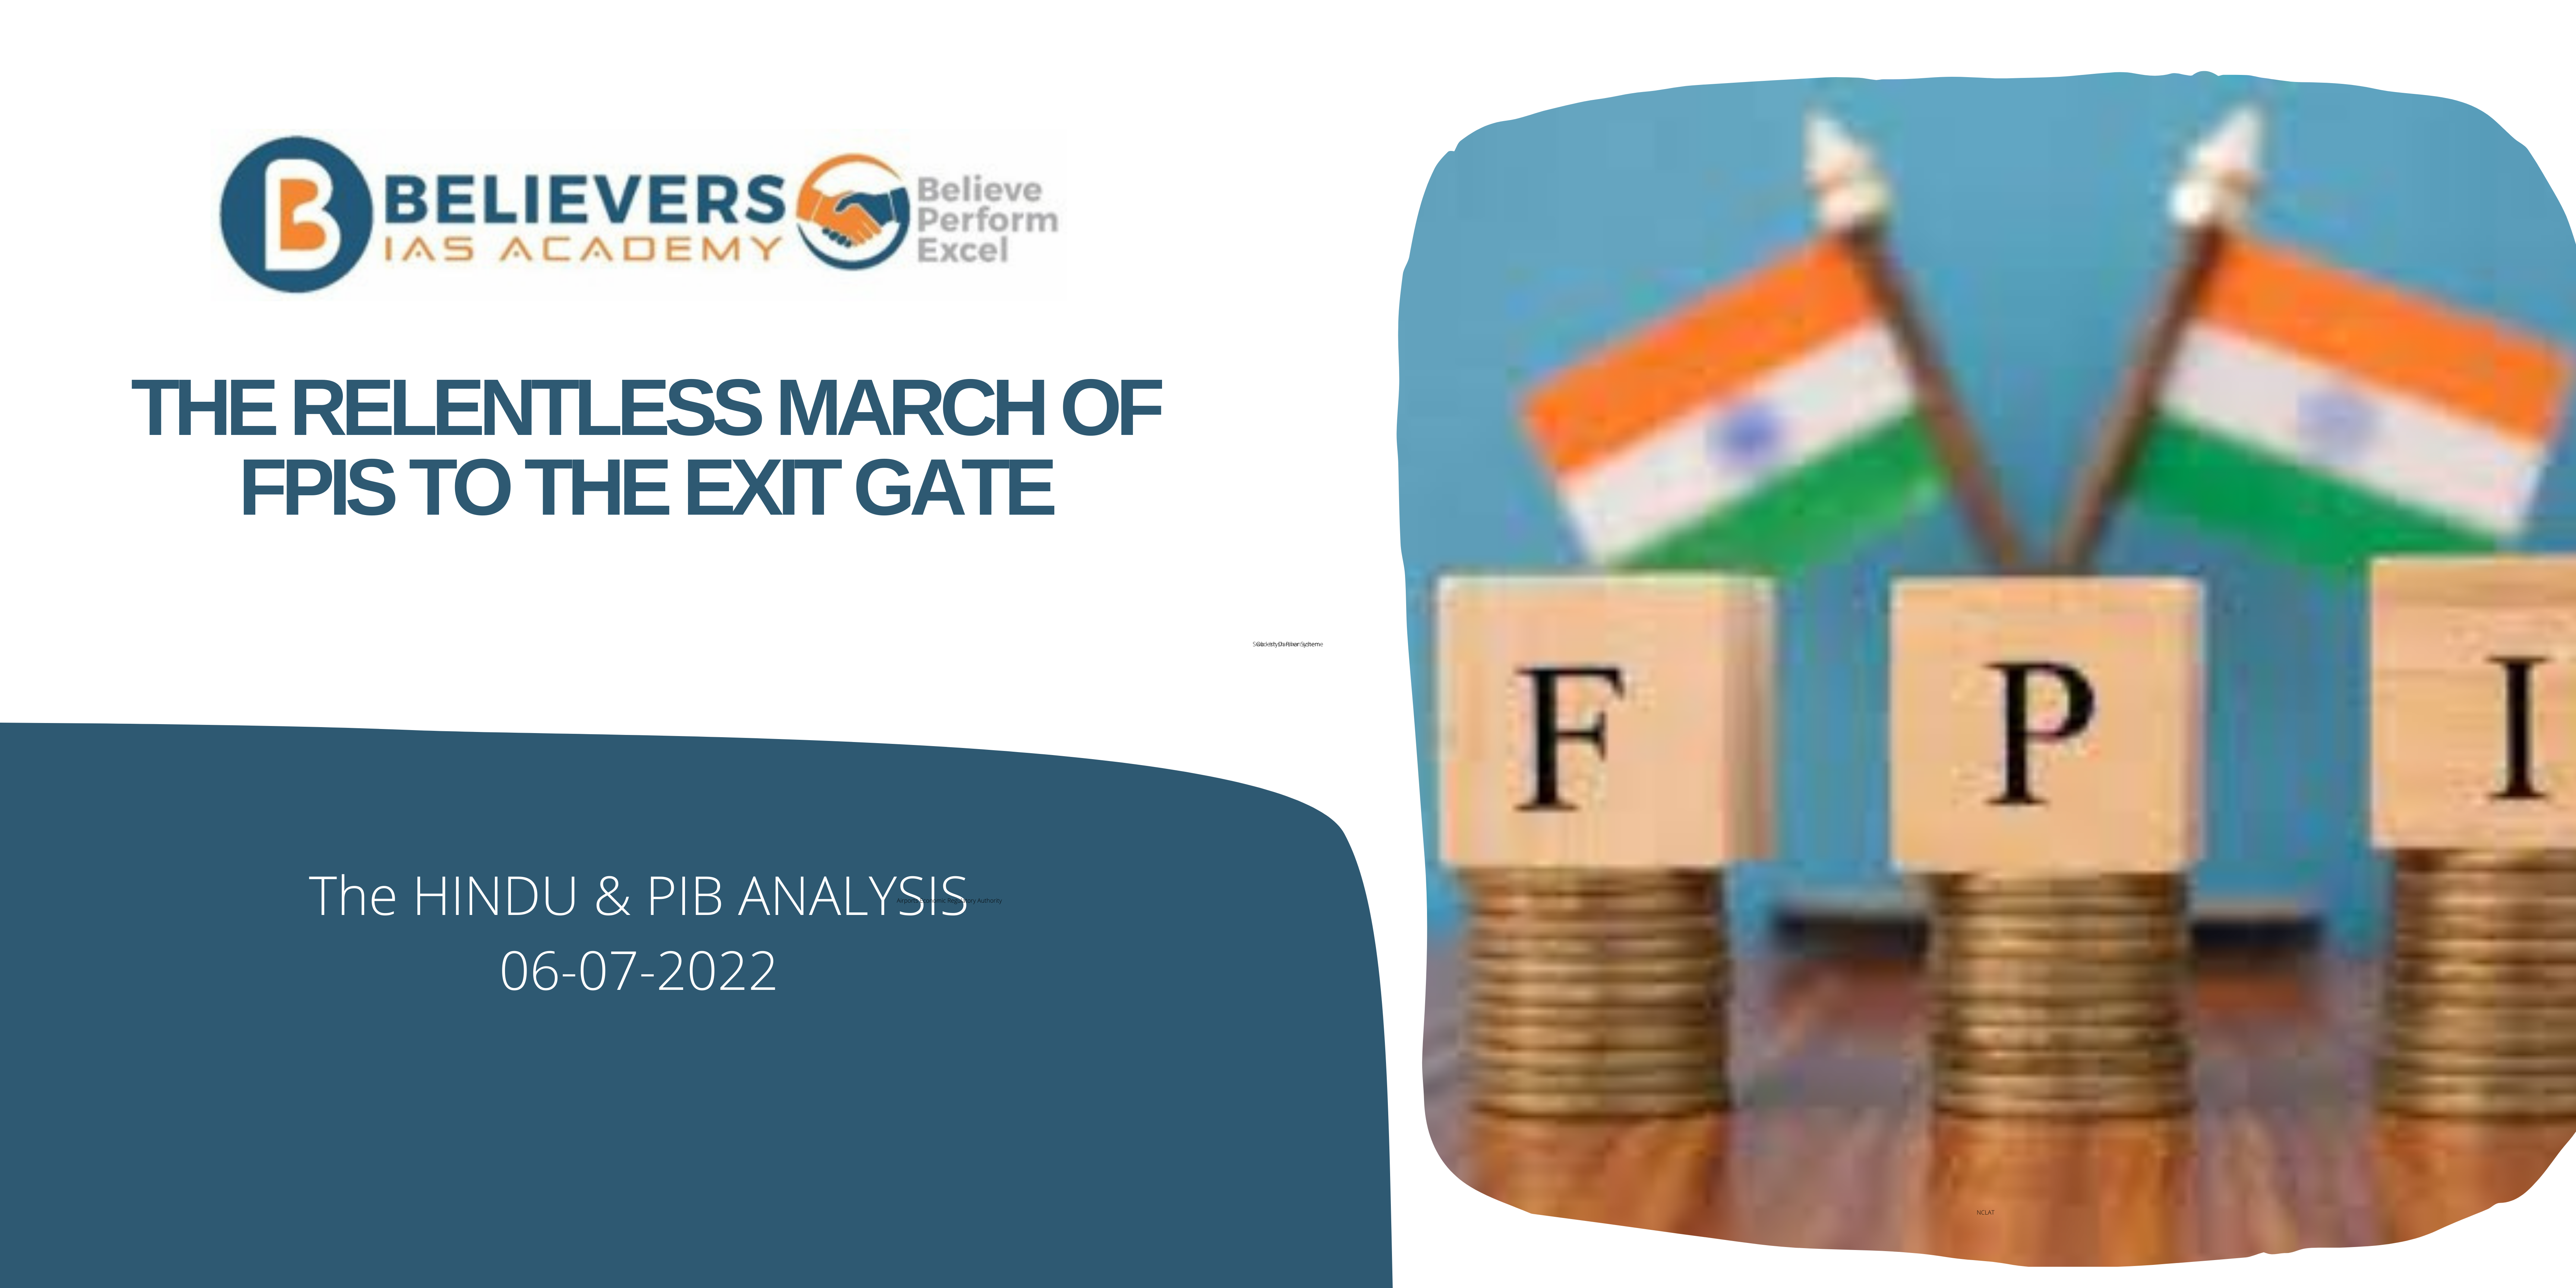 UPSC Current affairs - The Relentless March of FPIs to the Exit Gate